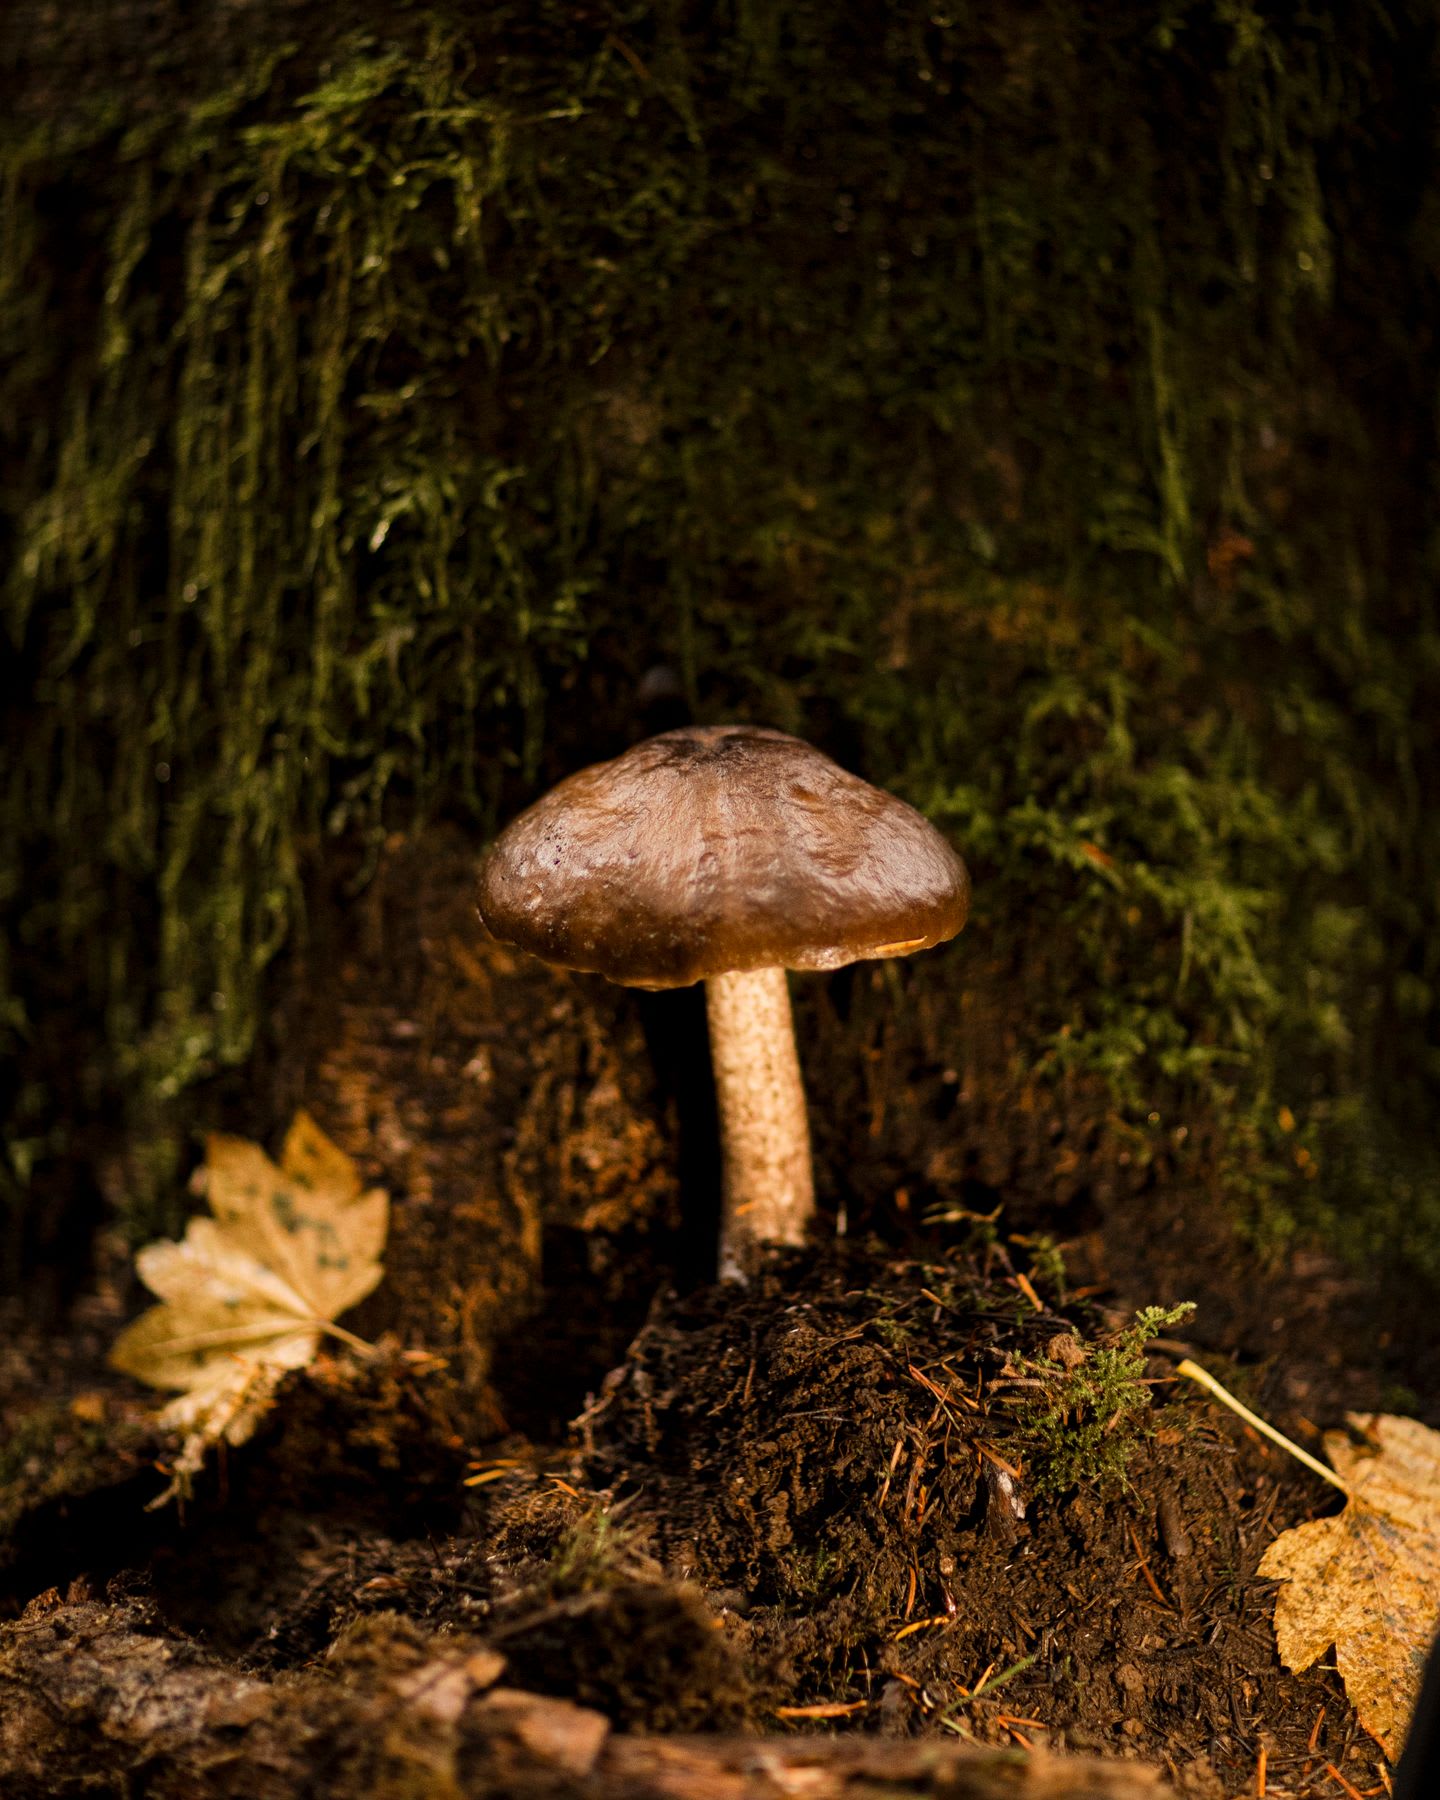 A single mushroom stands in a small pile of dirt in front of trees at night.